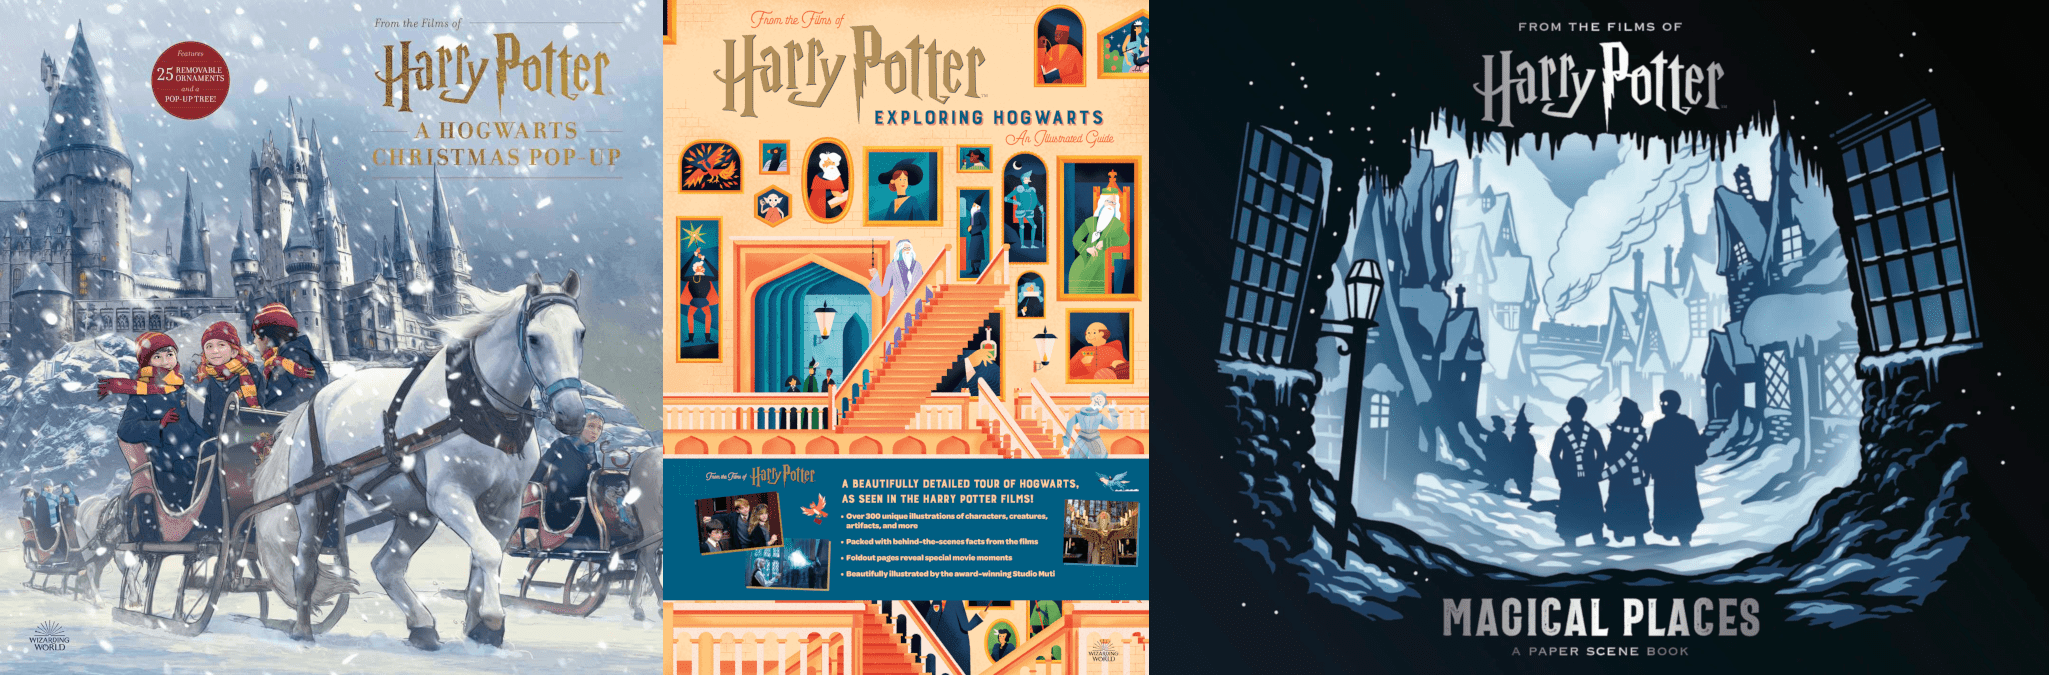 Harry Potter: Amazing Popup Guide to Diagon Alley Review